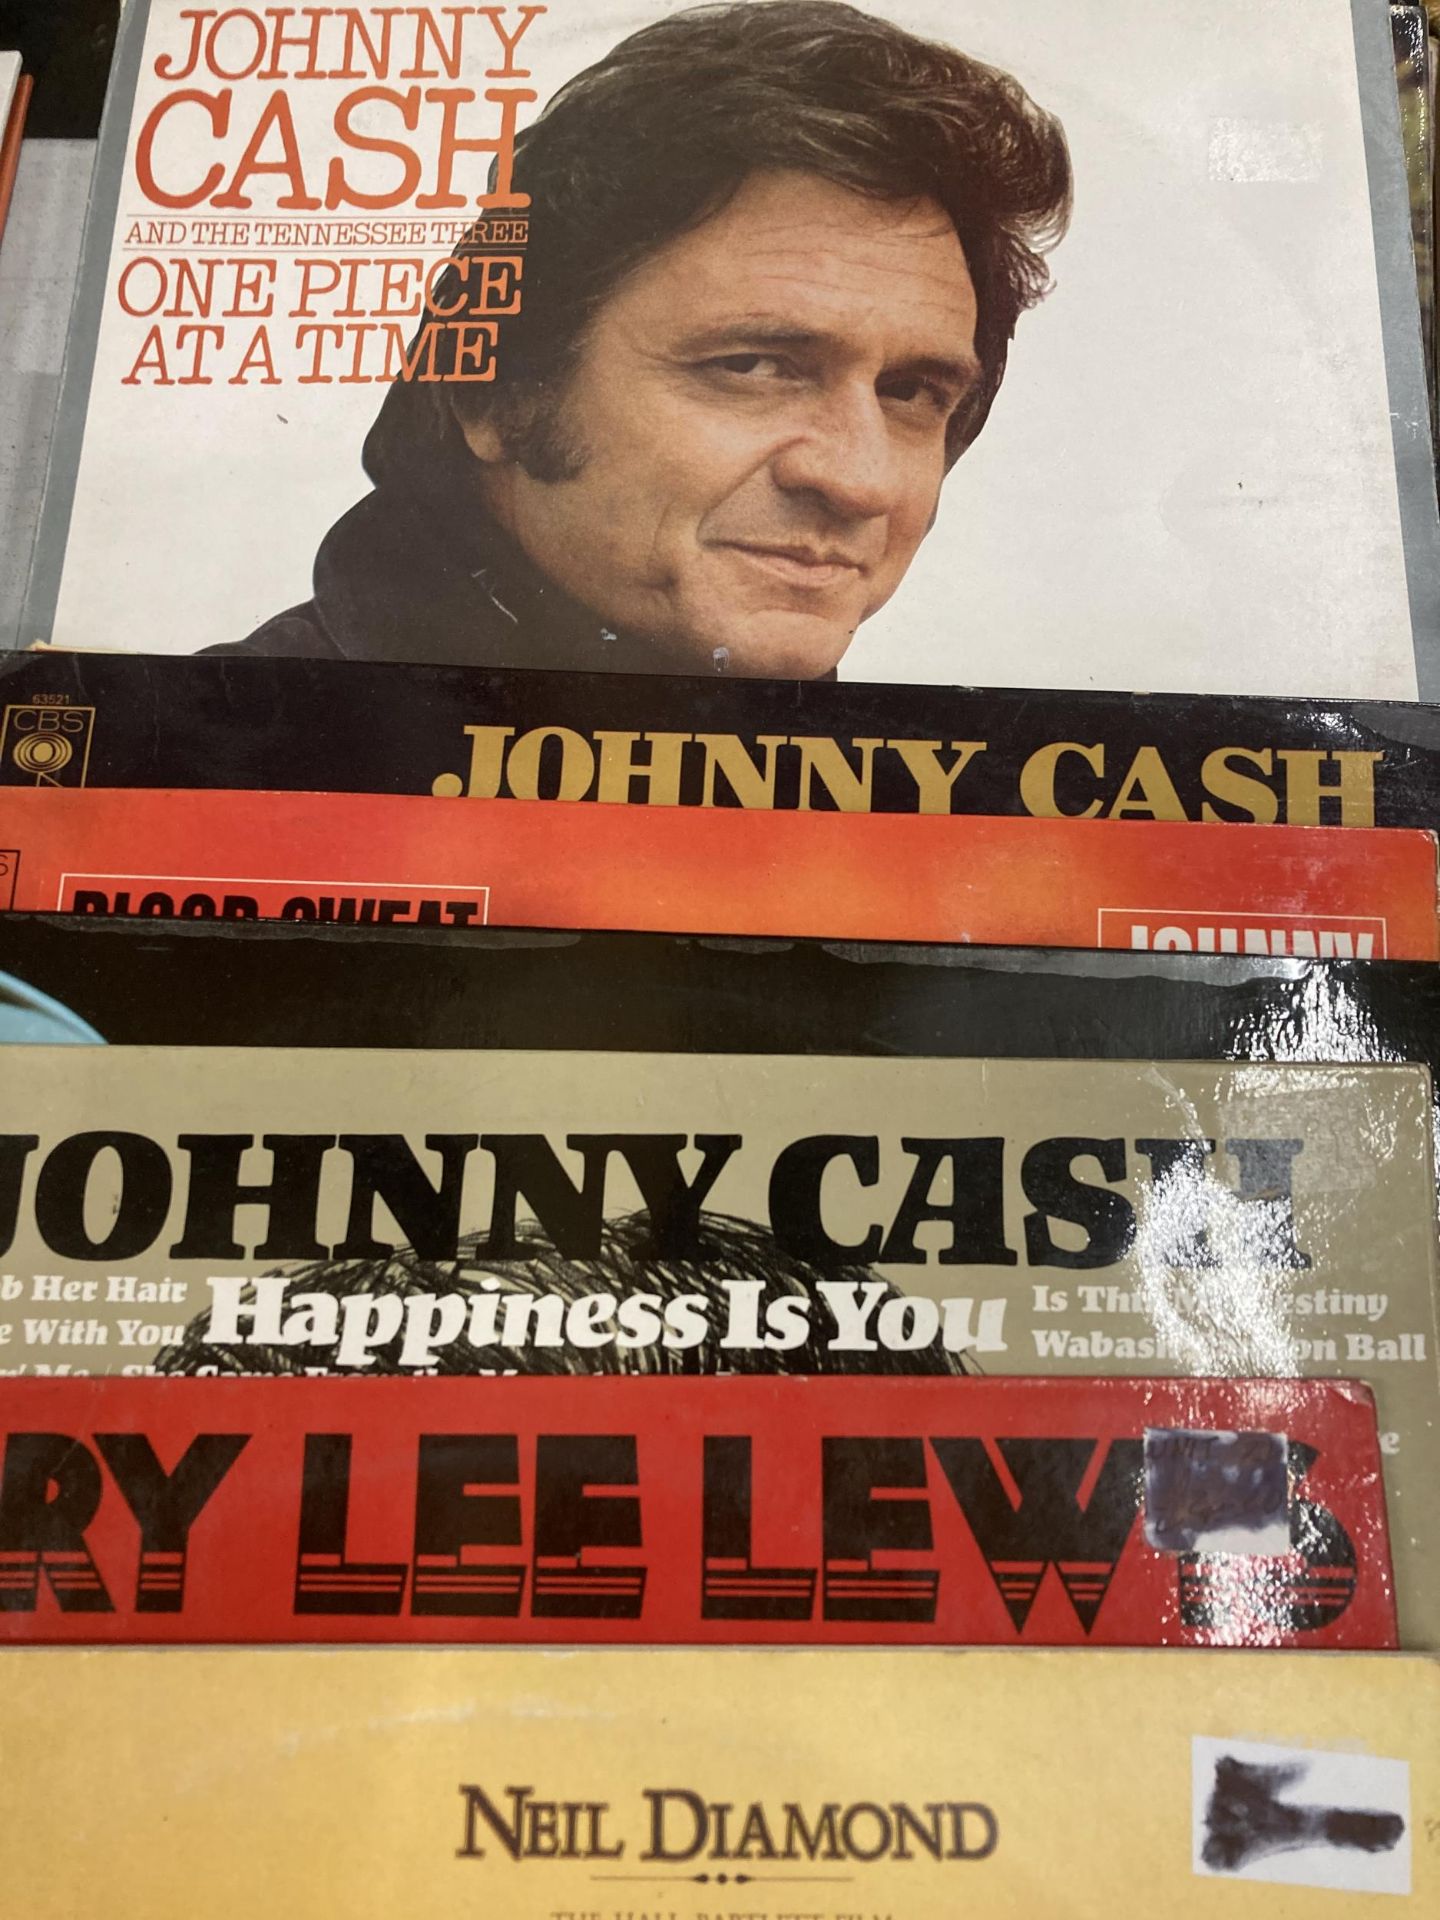 A COLLECTION OF LP RECORDS, ELVIS PRESLEY, JOHNNY CASH ETC - Image 5 of 5